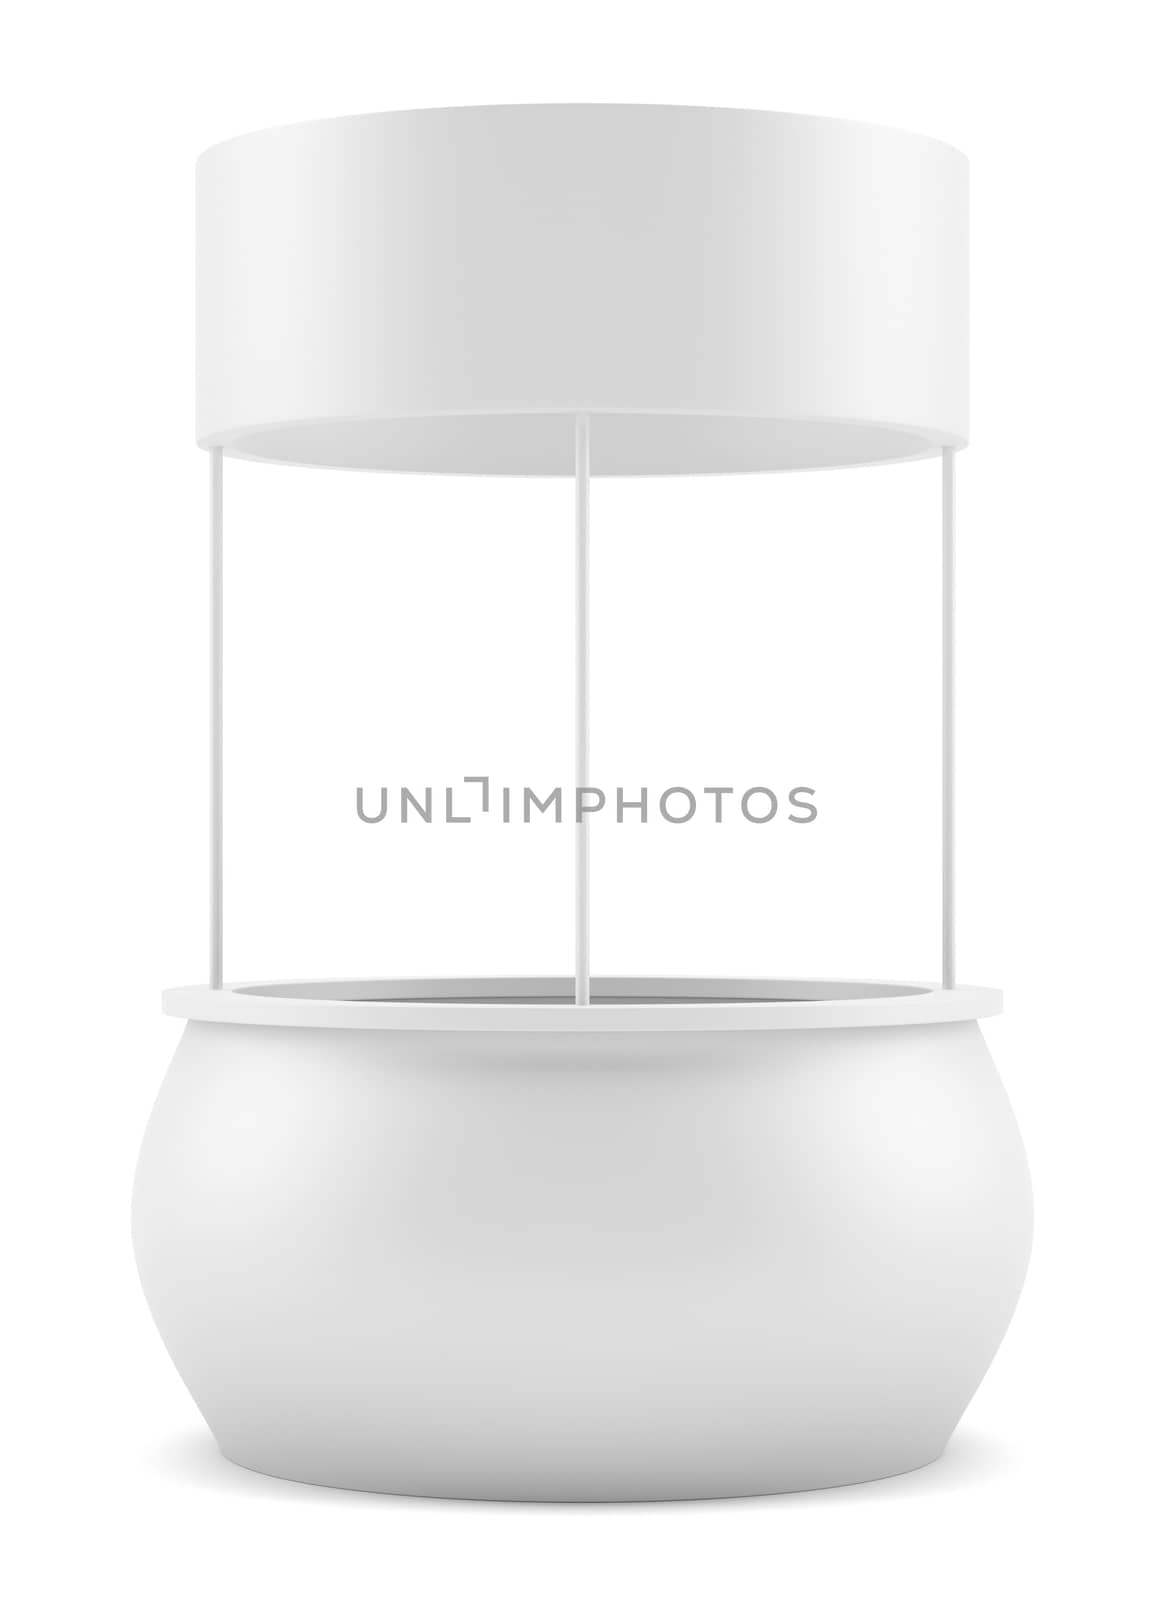 White round POS POI advertising retail stand. Isolated on white. 3D illustration. Template